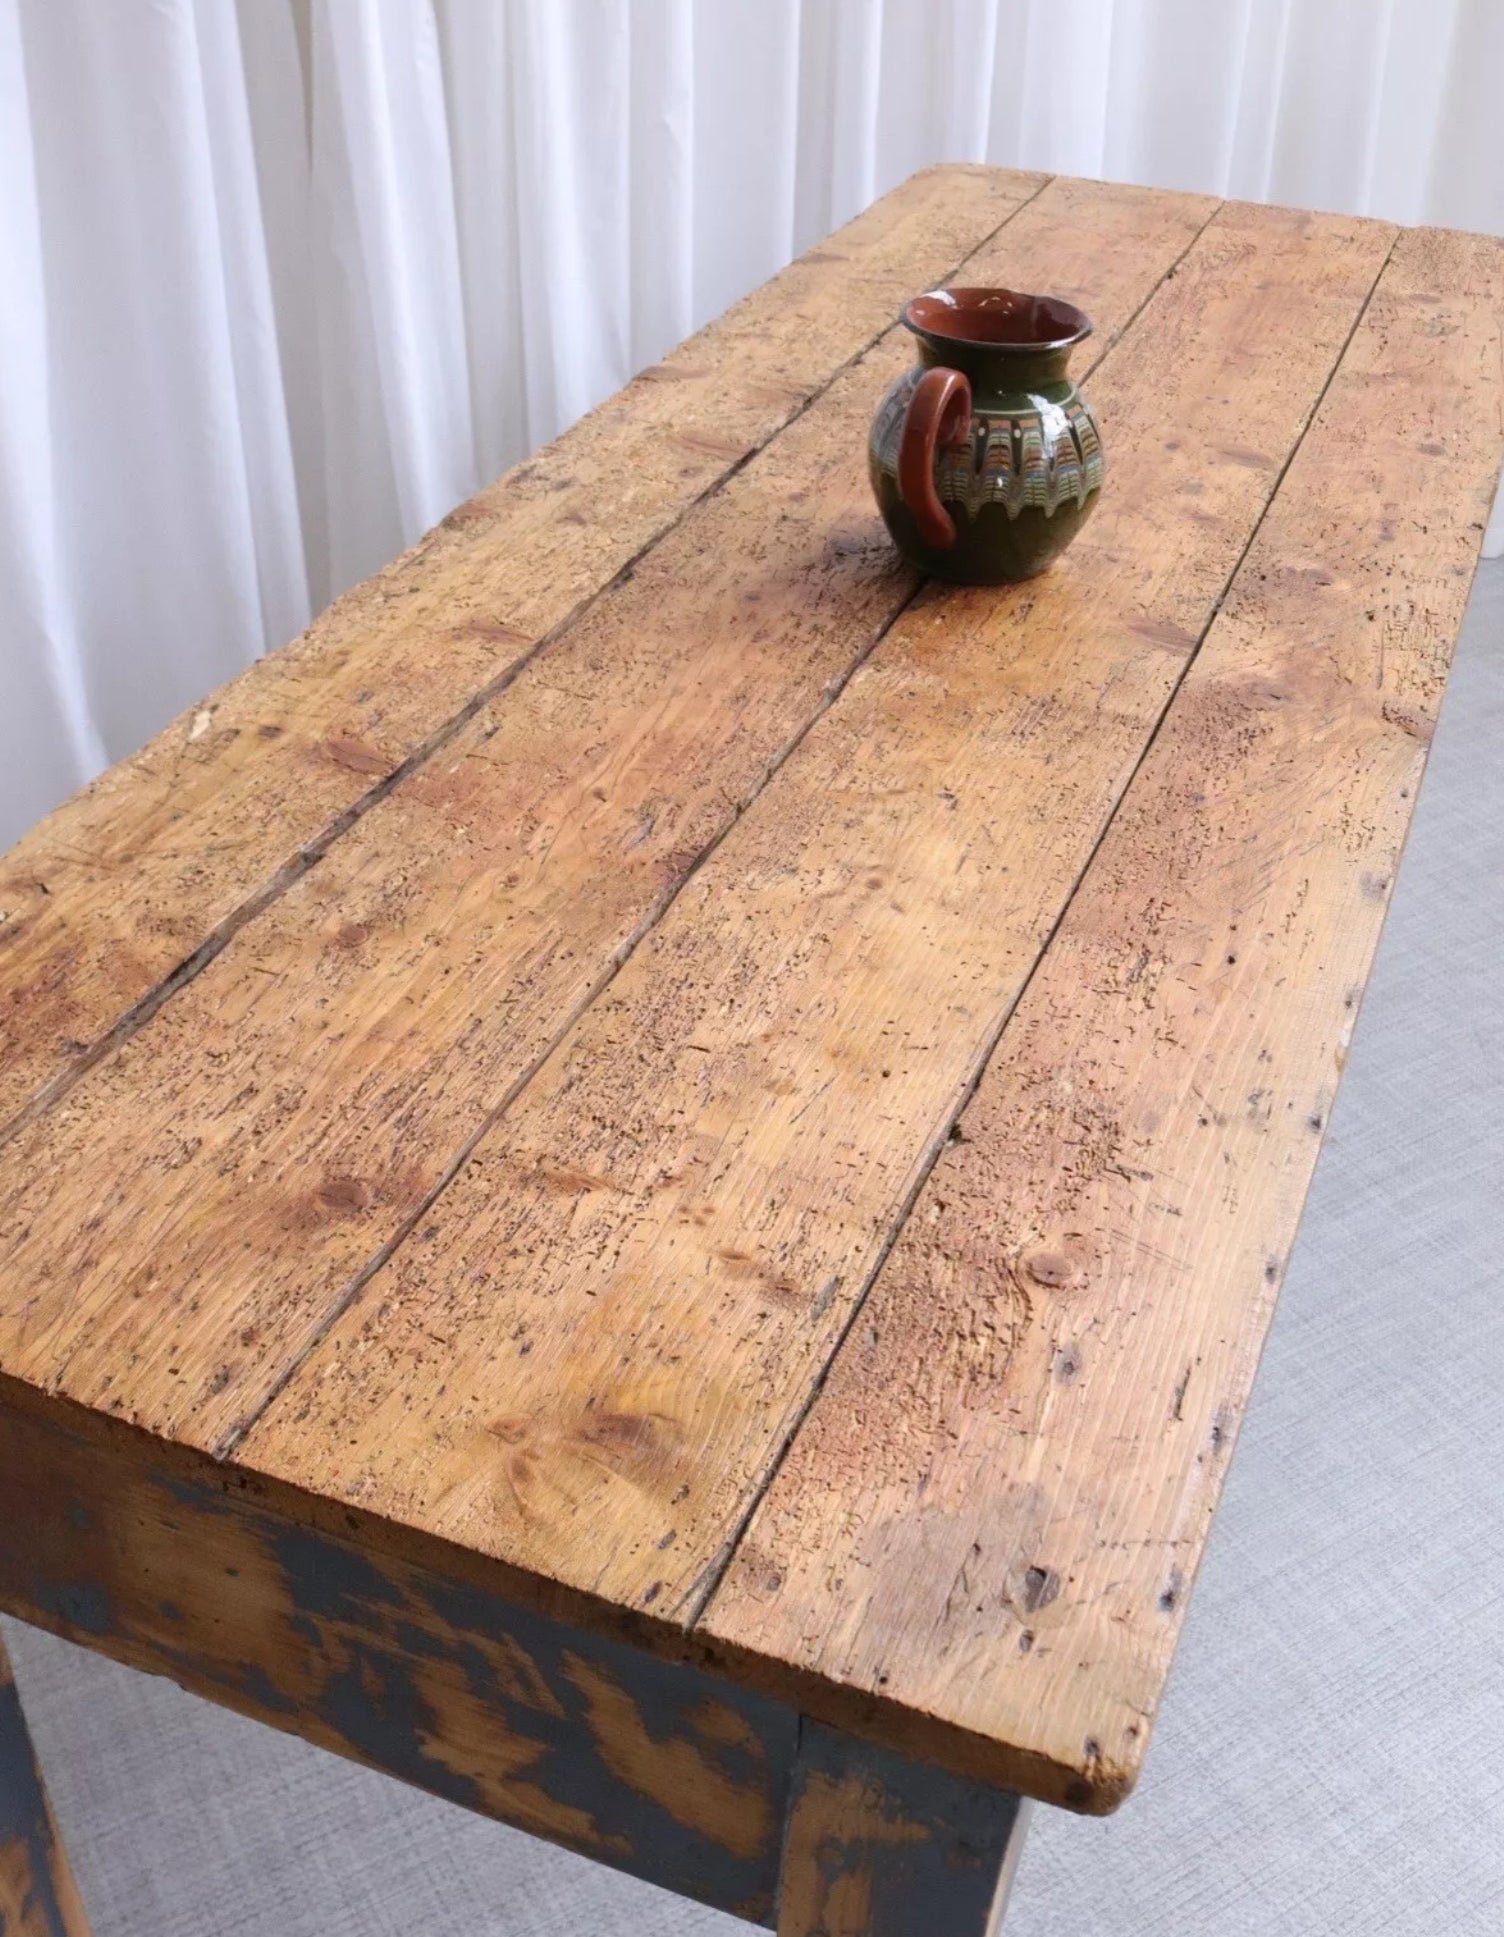 Large Rustic Solid Pine Kitchen Primitive Distressed Dining Table Character Wear - teakyfinders